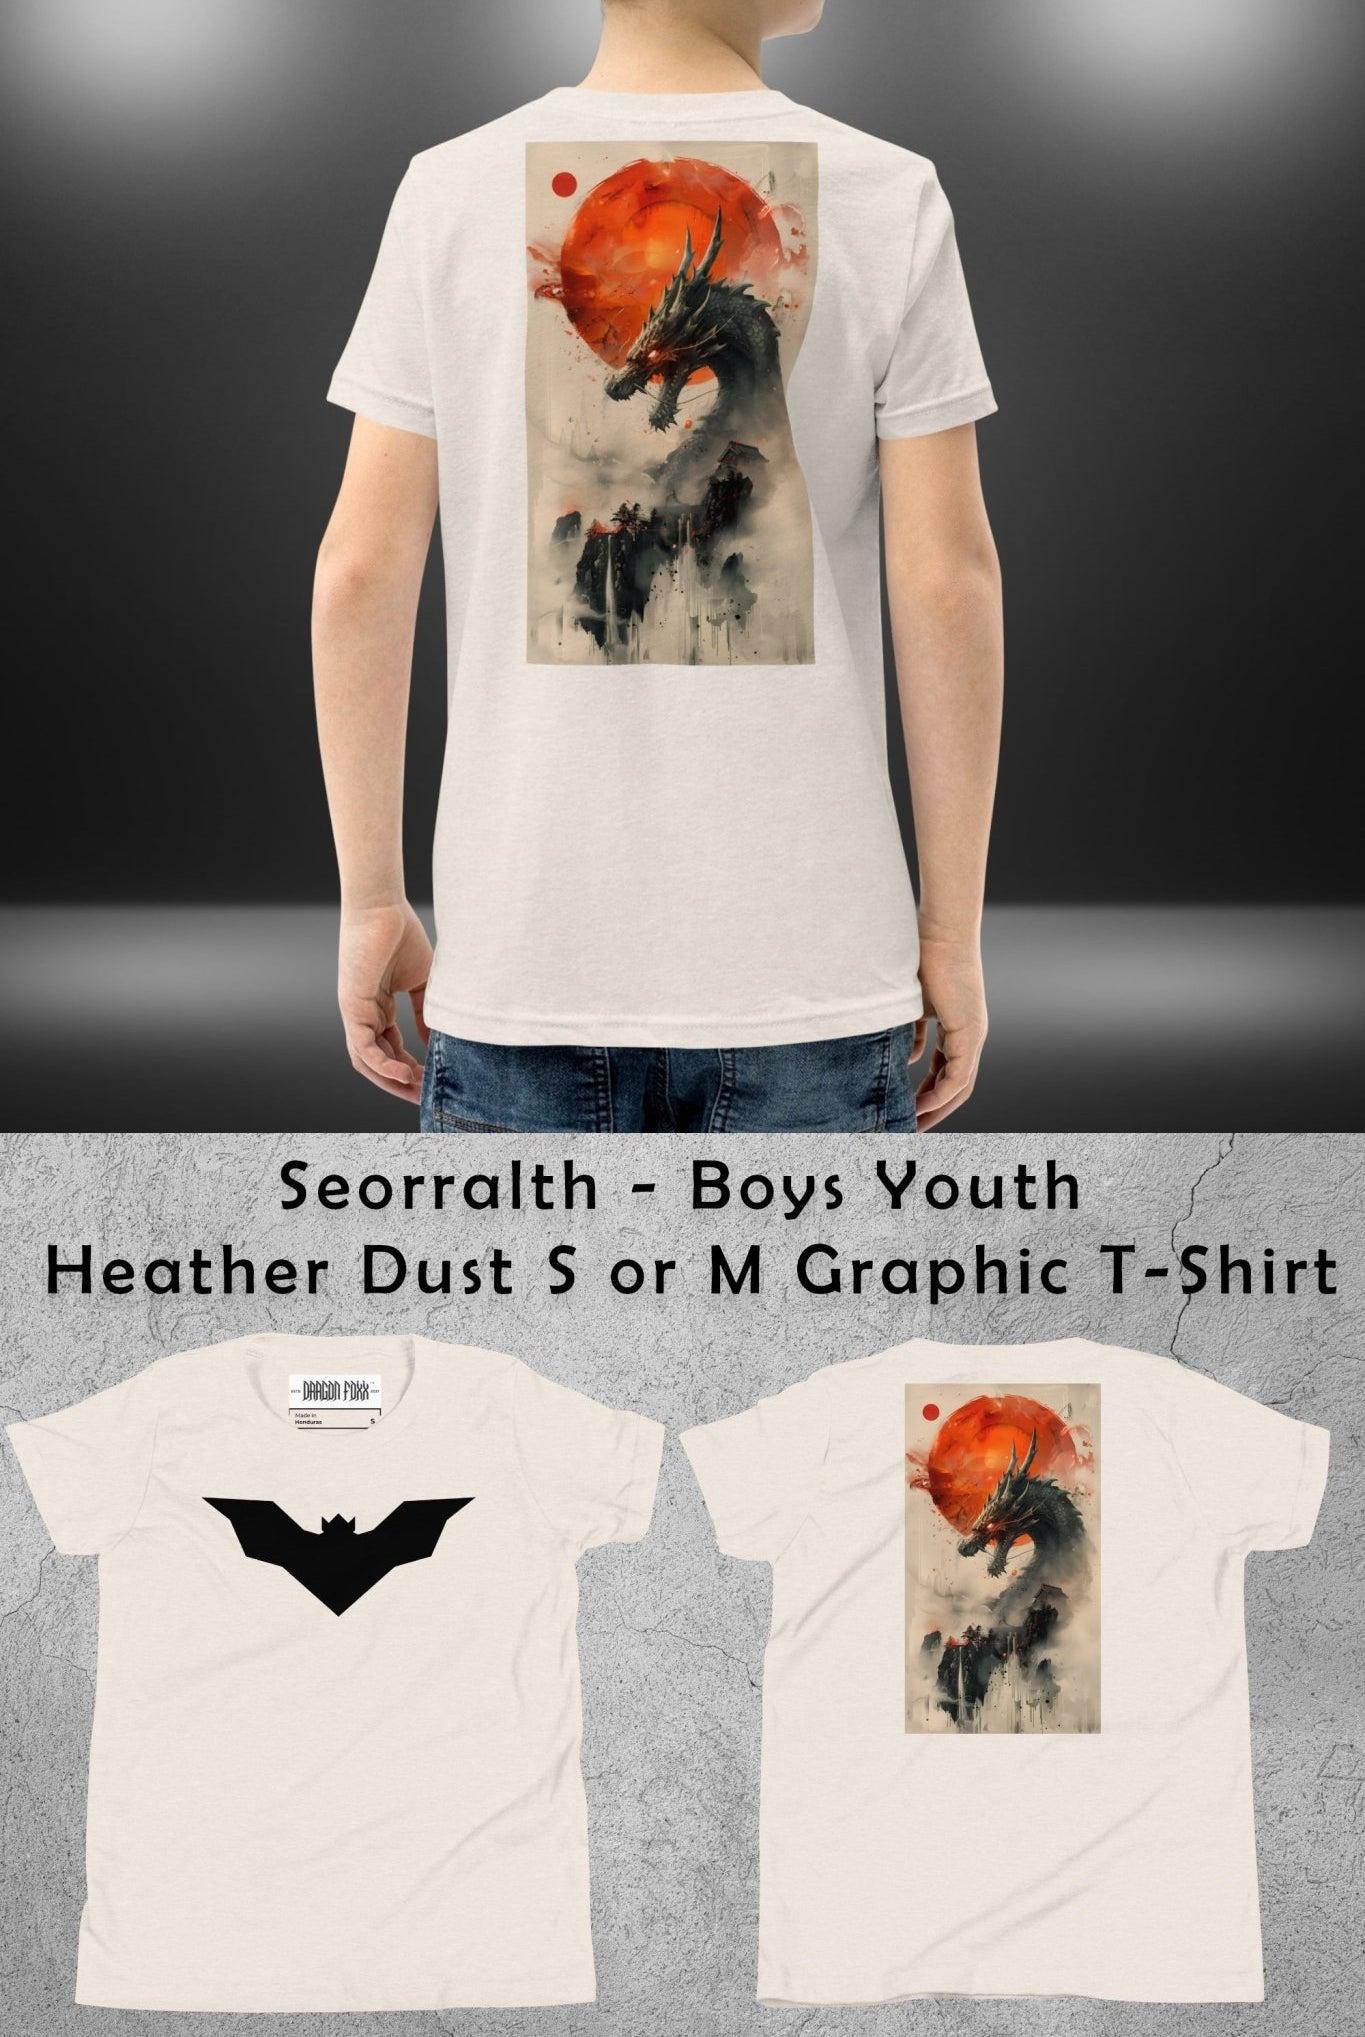 Seorralth - Boys Youth Heather Dust S or M Graphic T-Shirt - Boys Youth T-Shirts - DRAGON FOXX™ - Seorralth - Boys Youth Heather Dust S or M Graphic T-Shirt - 5879947_17604 - S - Heather Dust - Boys Graphic T-shirt - Boys T-Shirt - Boys Youth Graphic T-Shirt